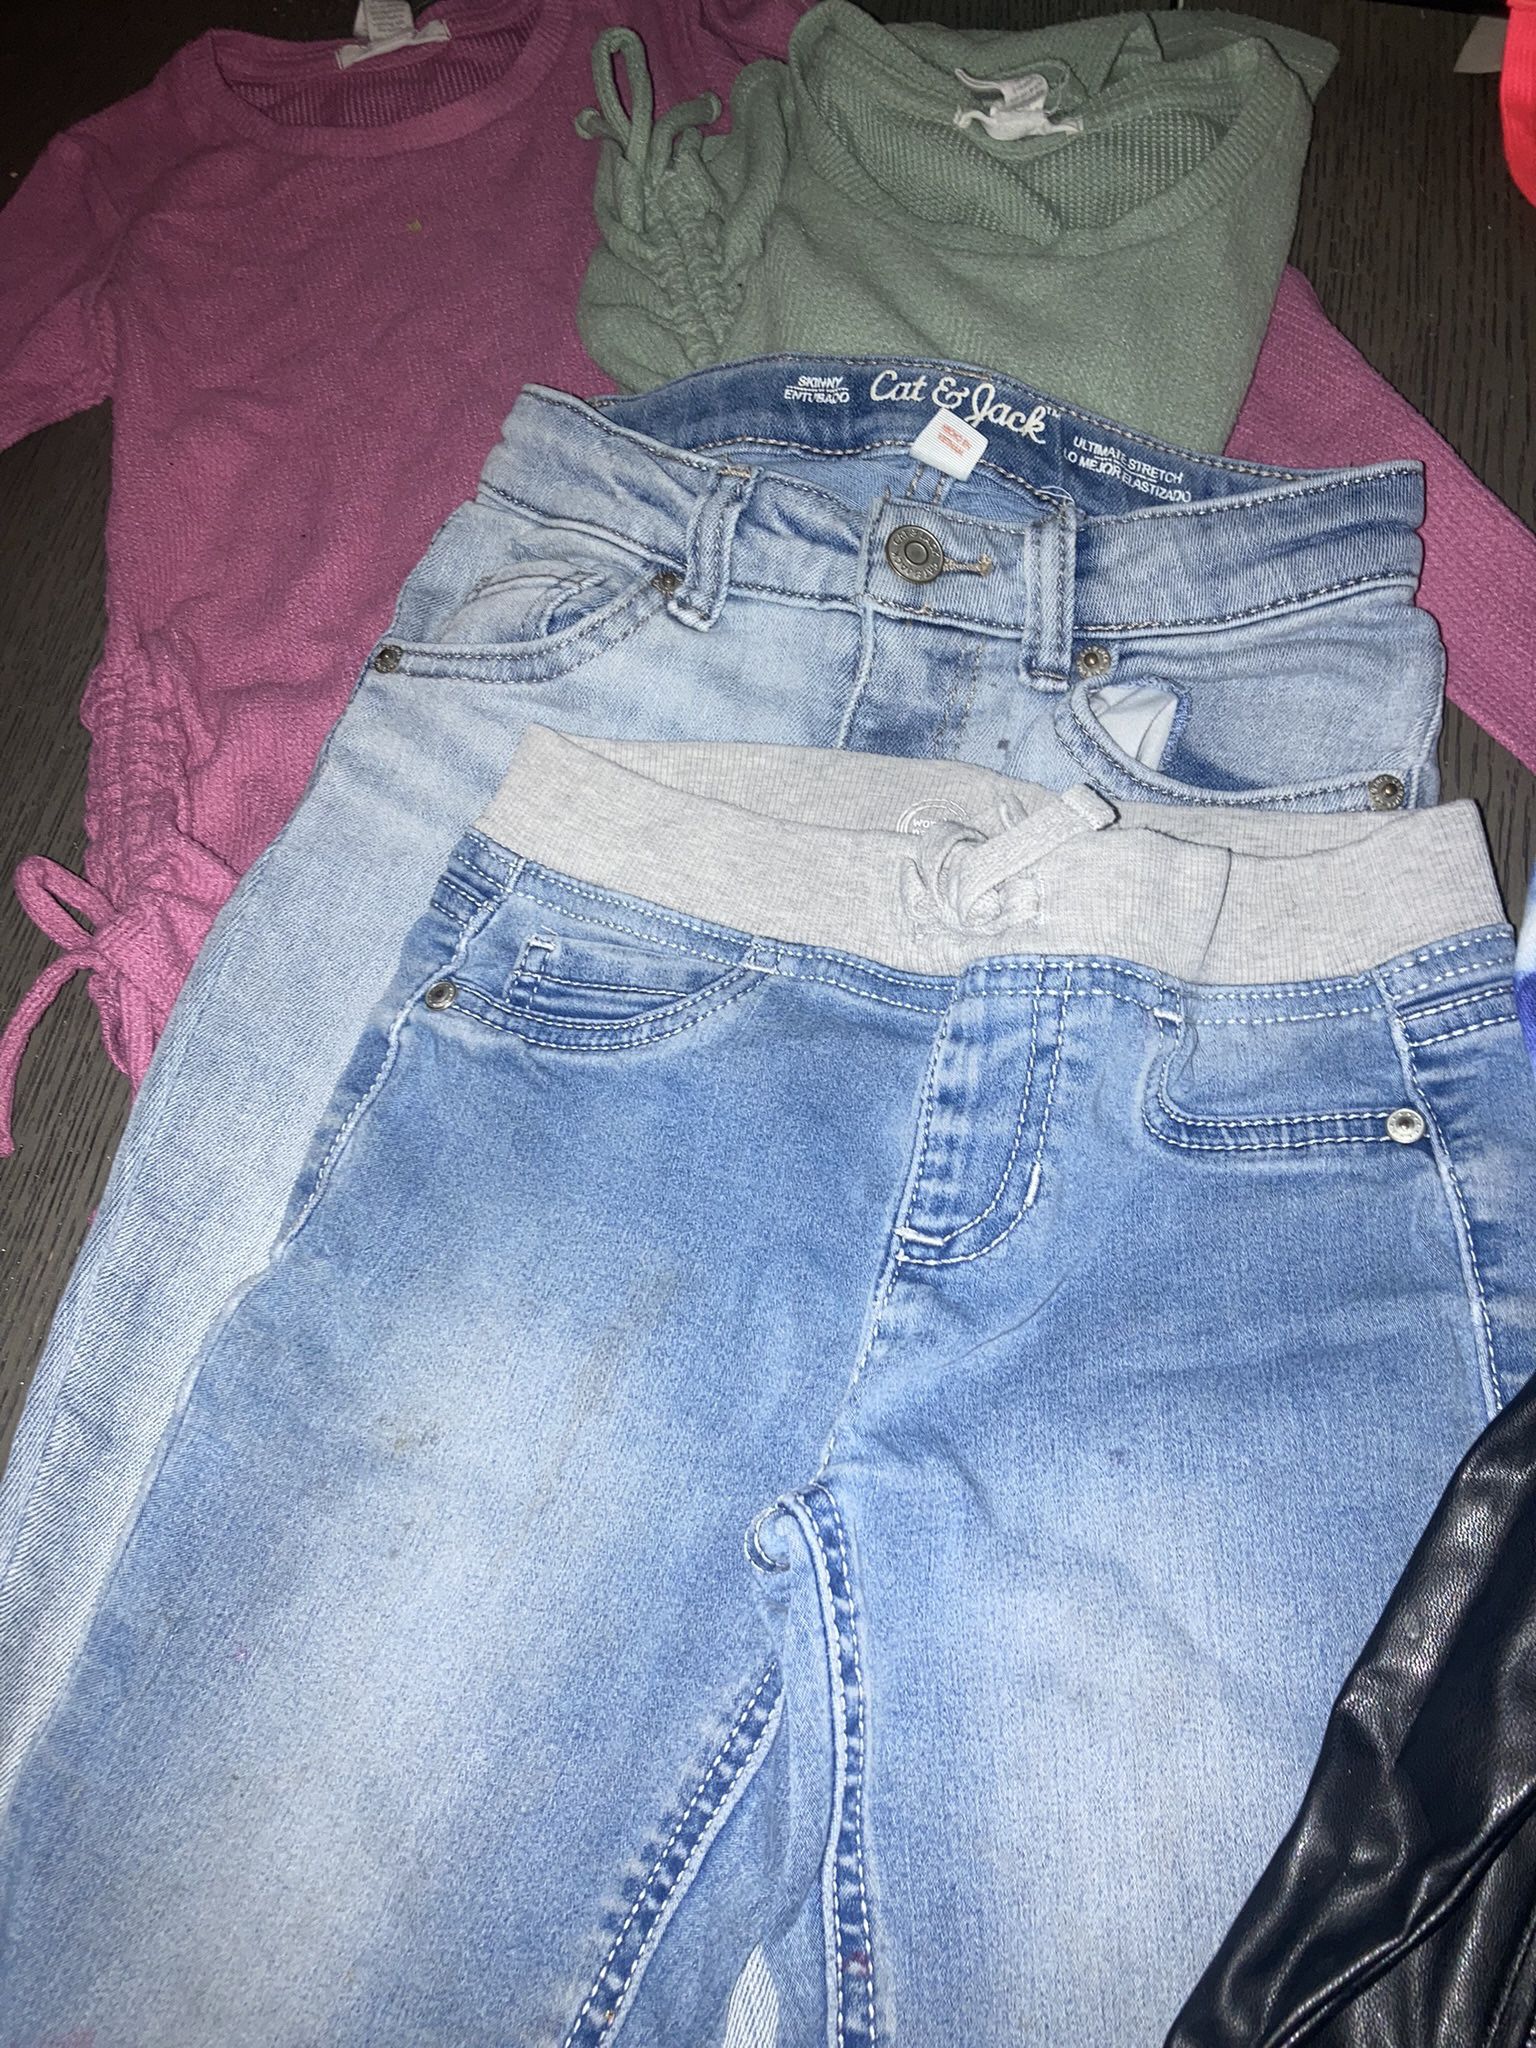 Girls Size 7 Lot Of Clothing Gently Used